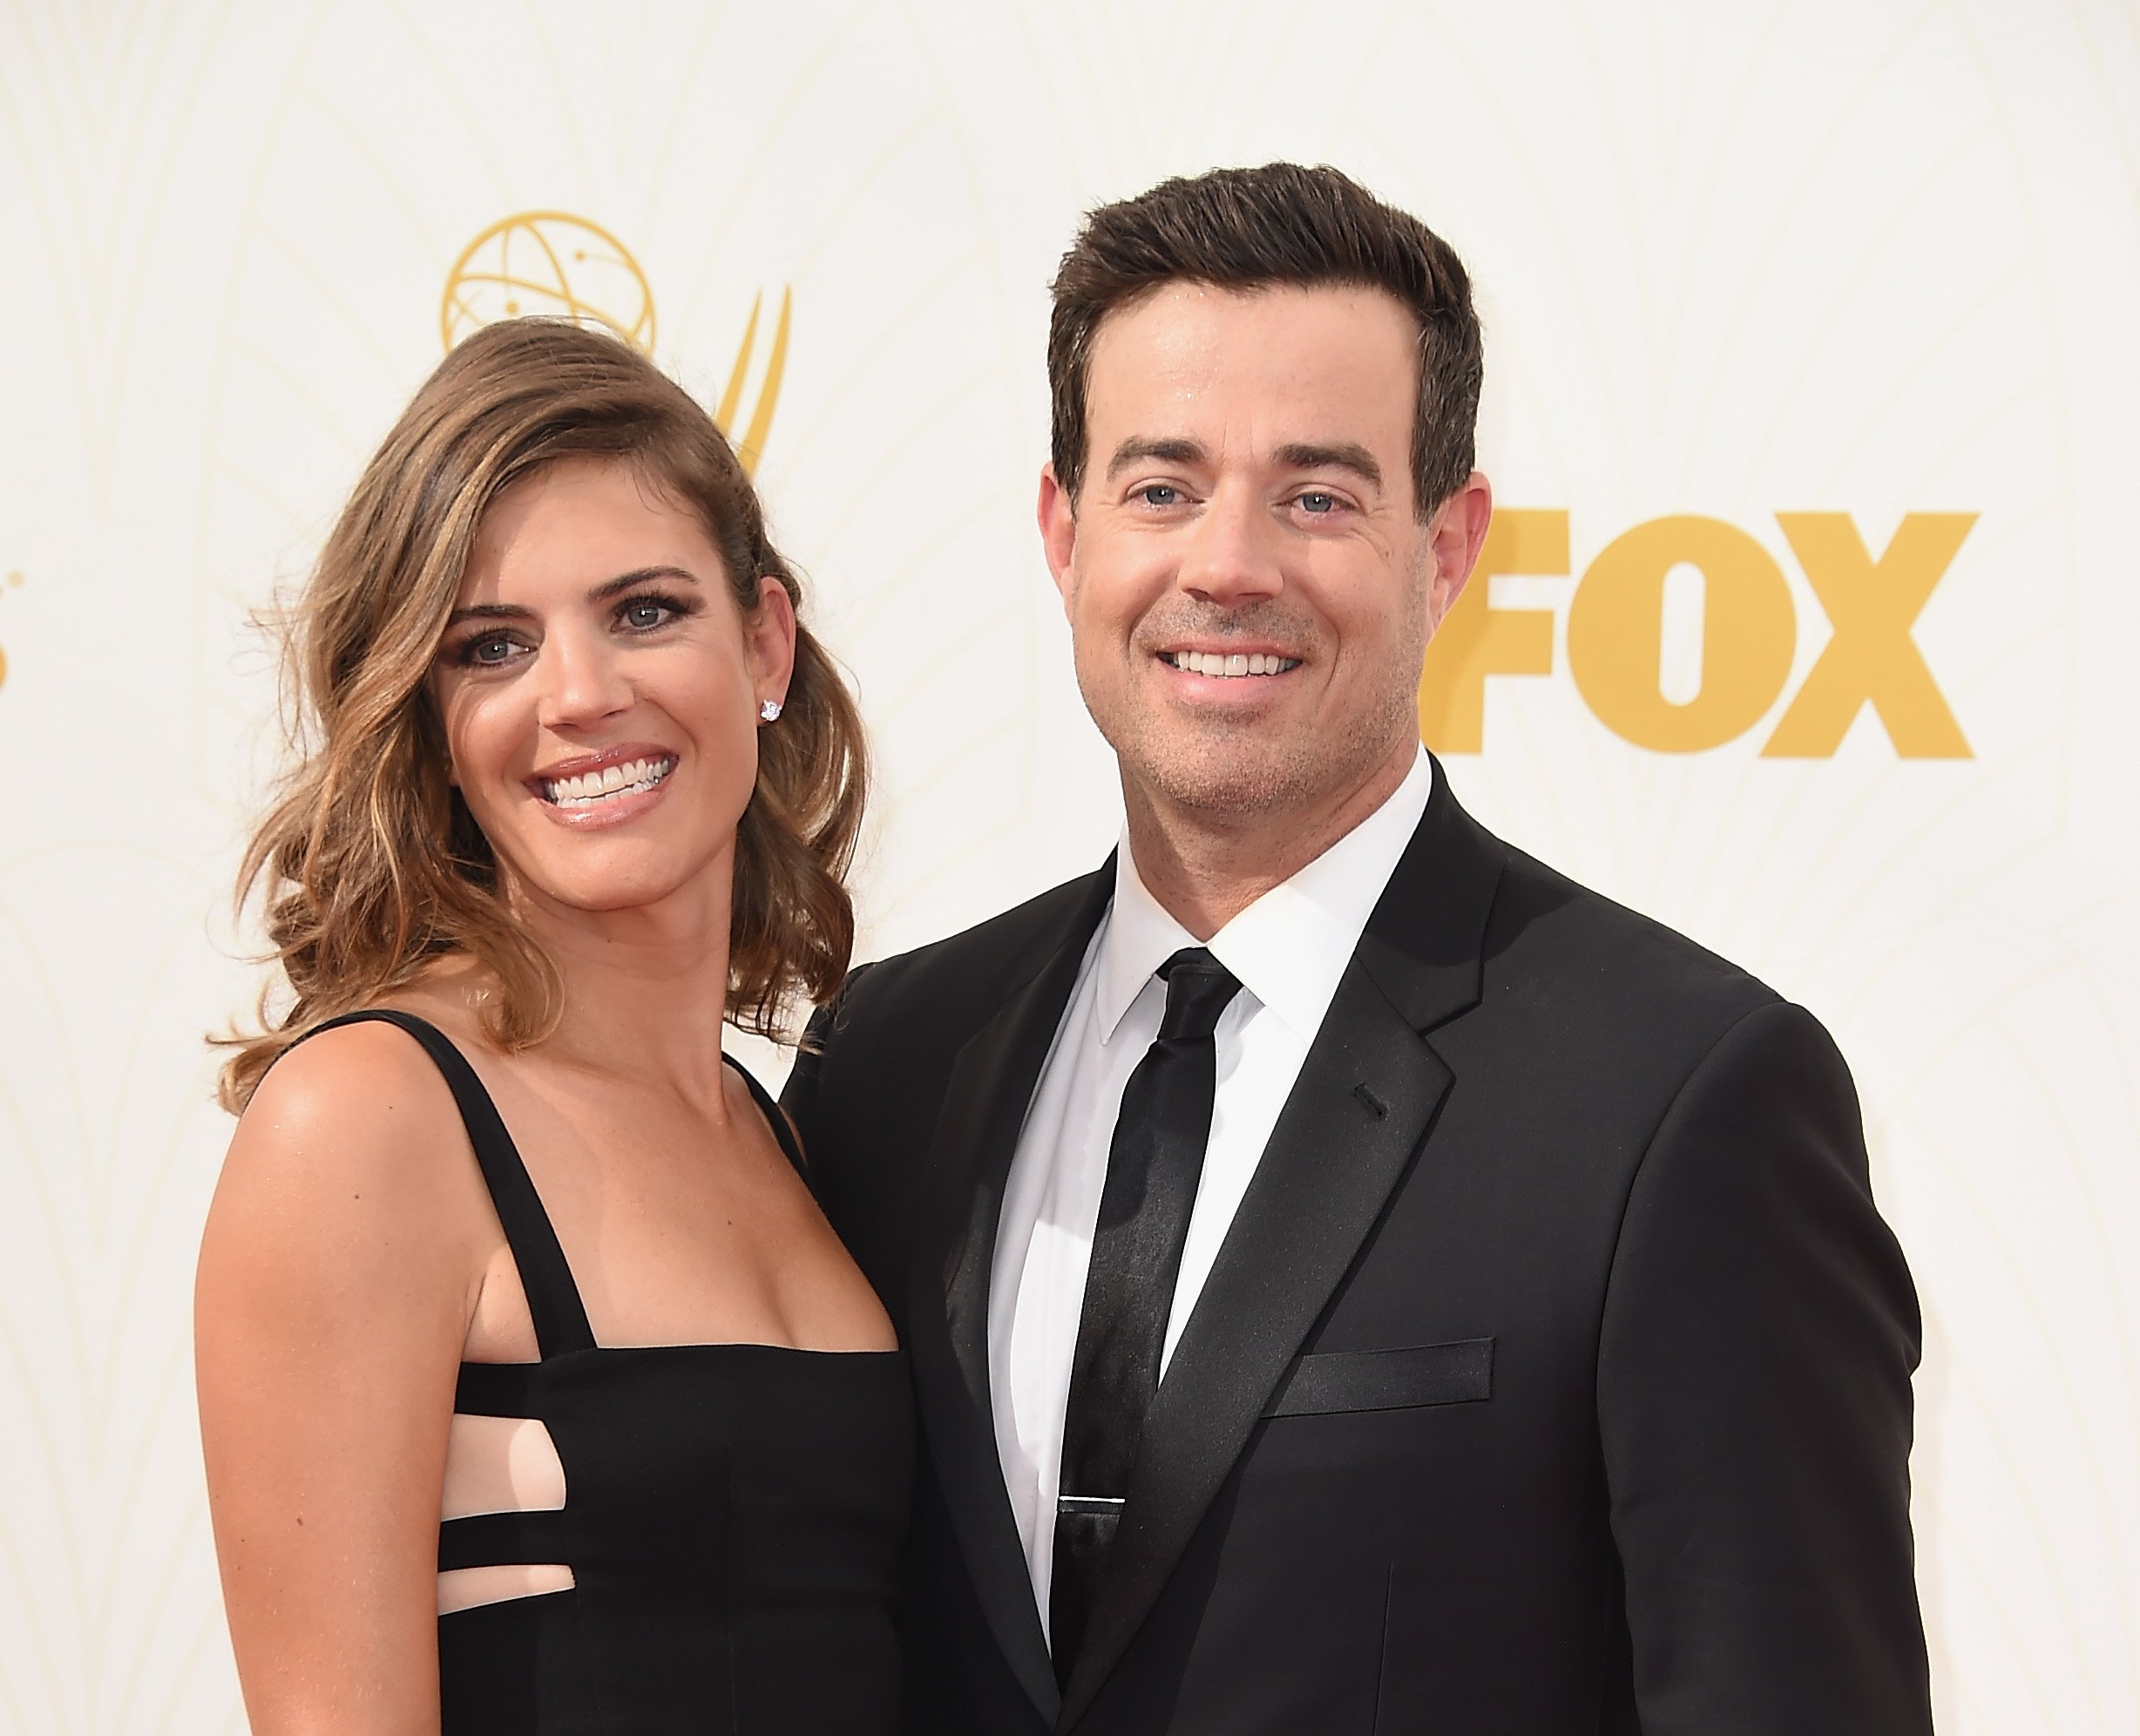 Siri Pinter and TV personality Carson Daly attend the 67th Annual Primetime Emmy Awards at Microsoft Theater on September 20, 2015 in Los Angeles, California | Source: Getty Images 